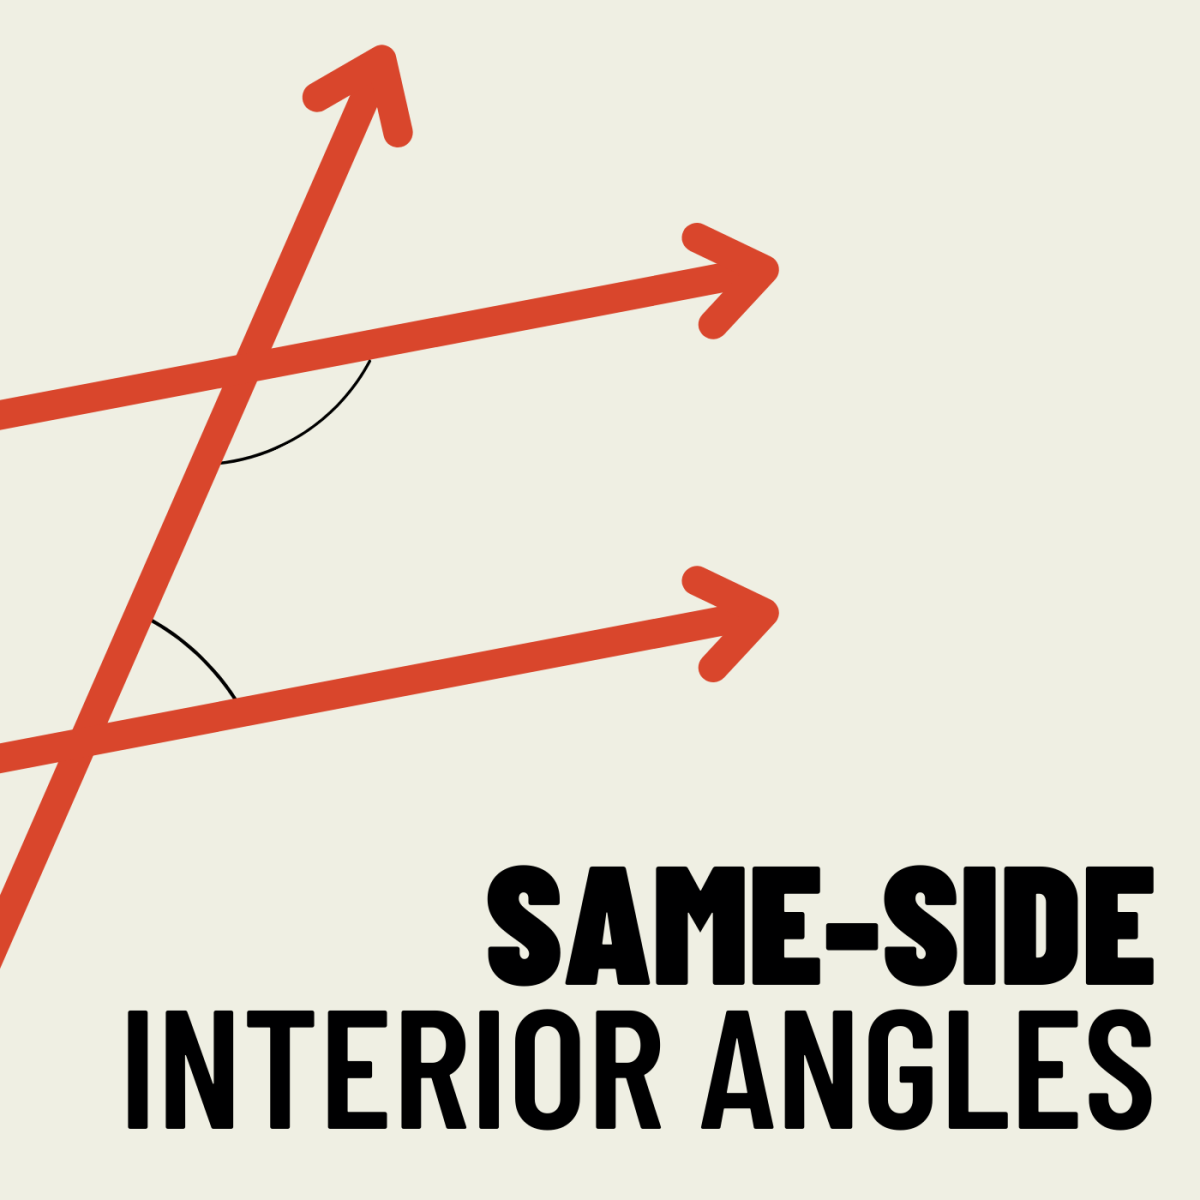 All about same-side interior angles